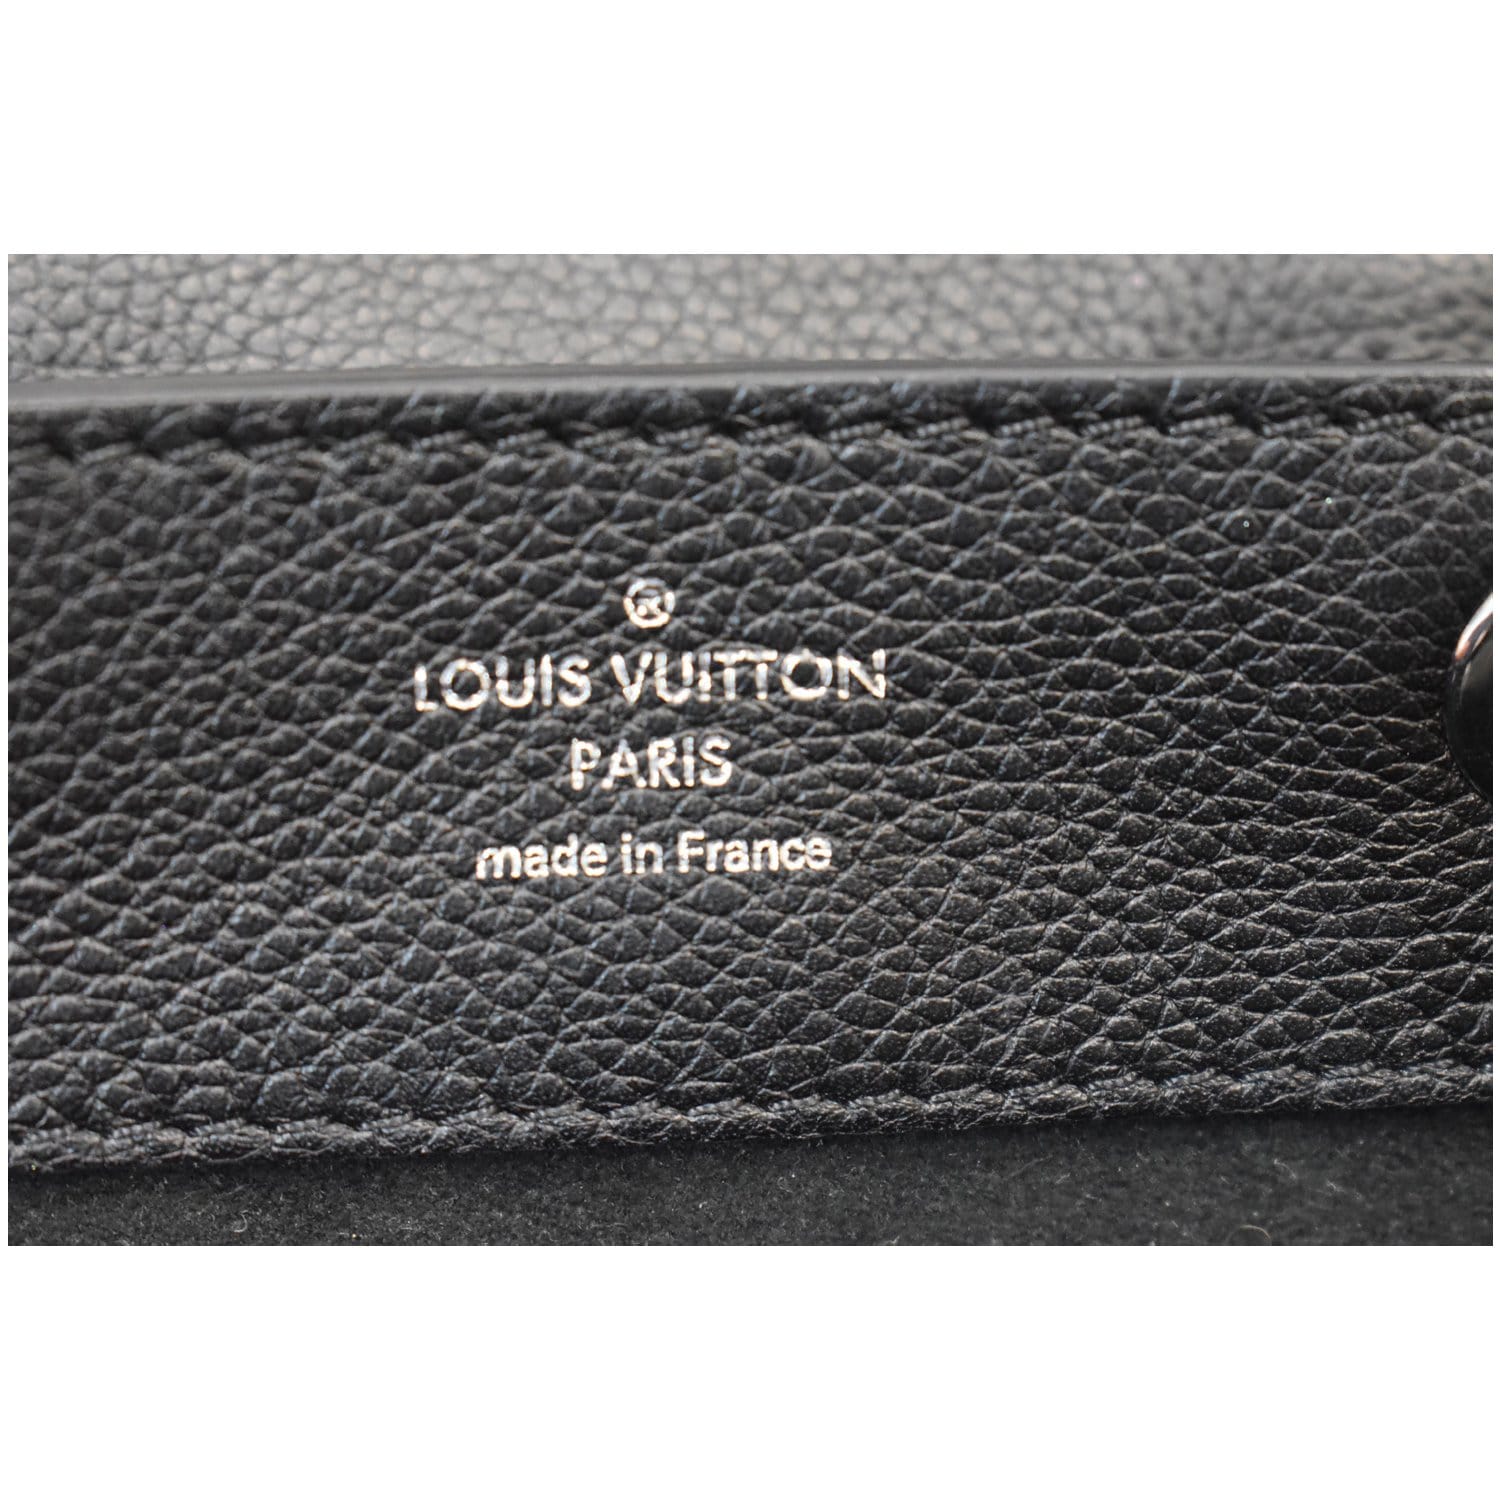 LOUIS VUITTON #39400 LockMe Black Suede-Leather Backpack